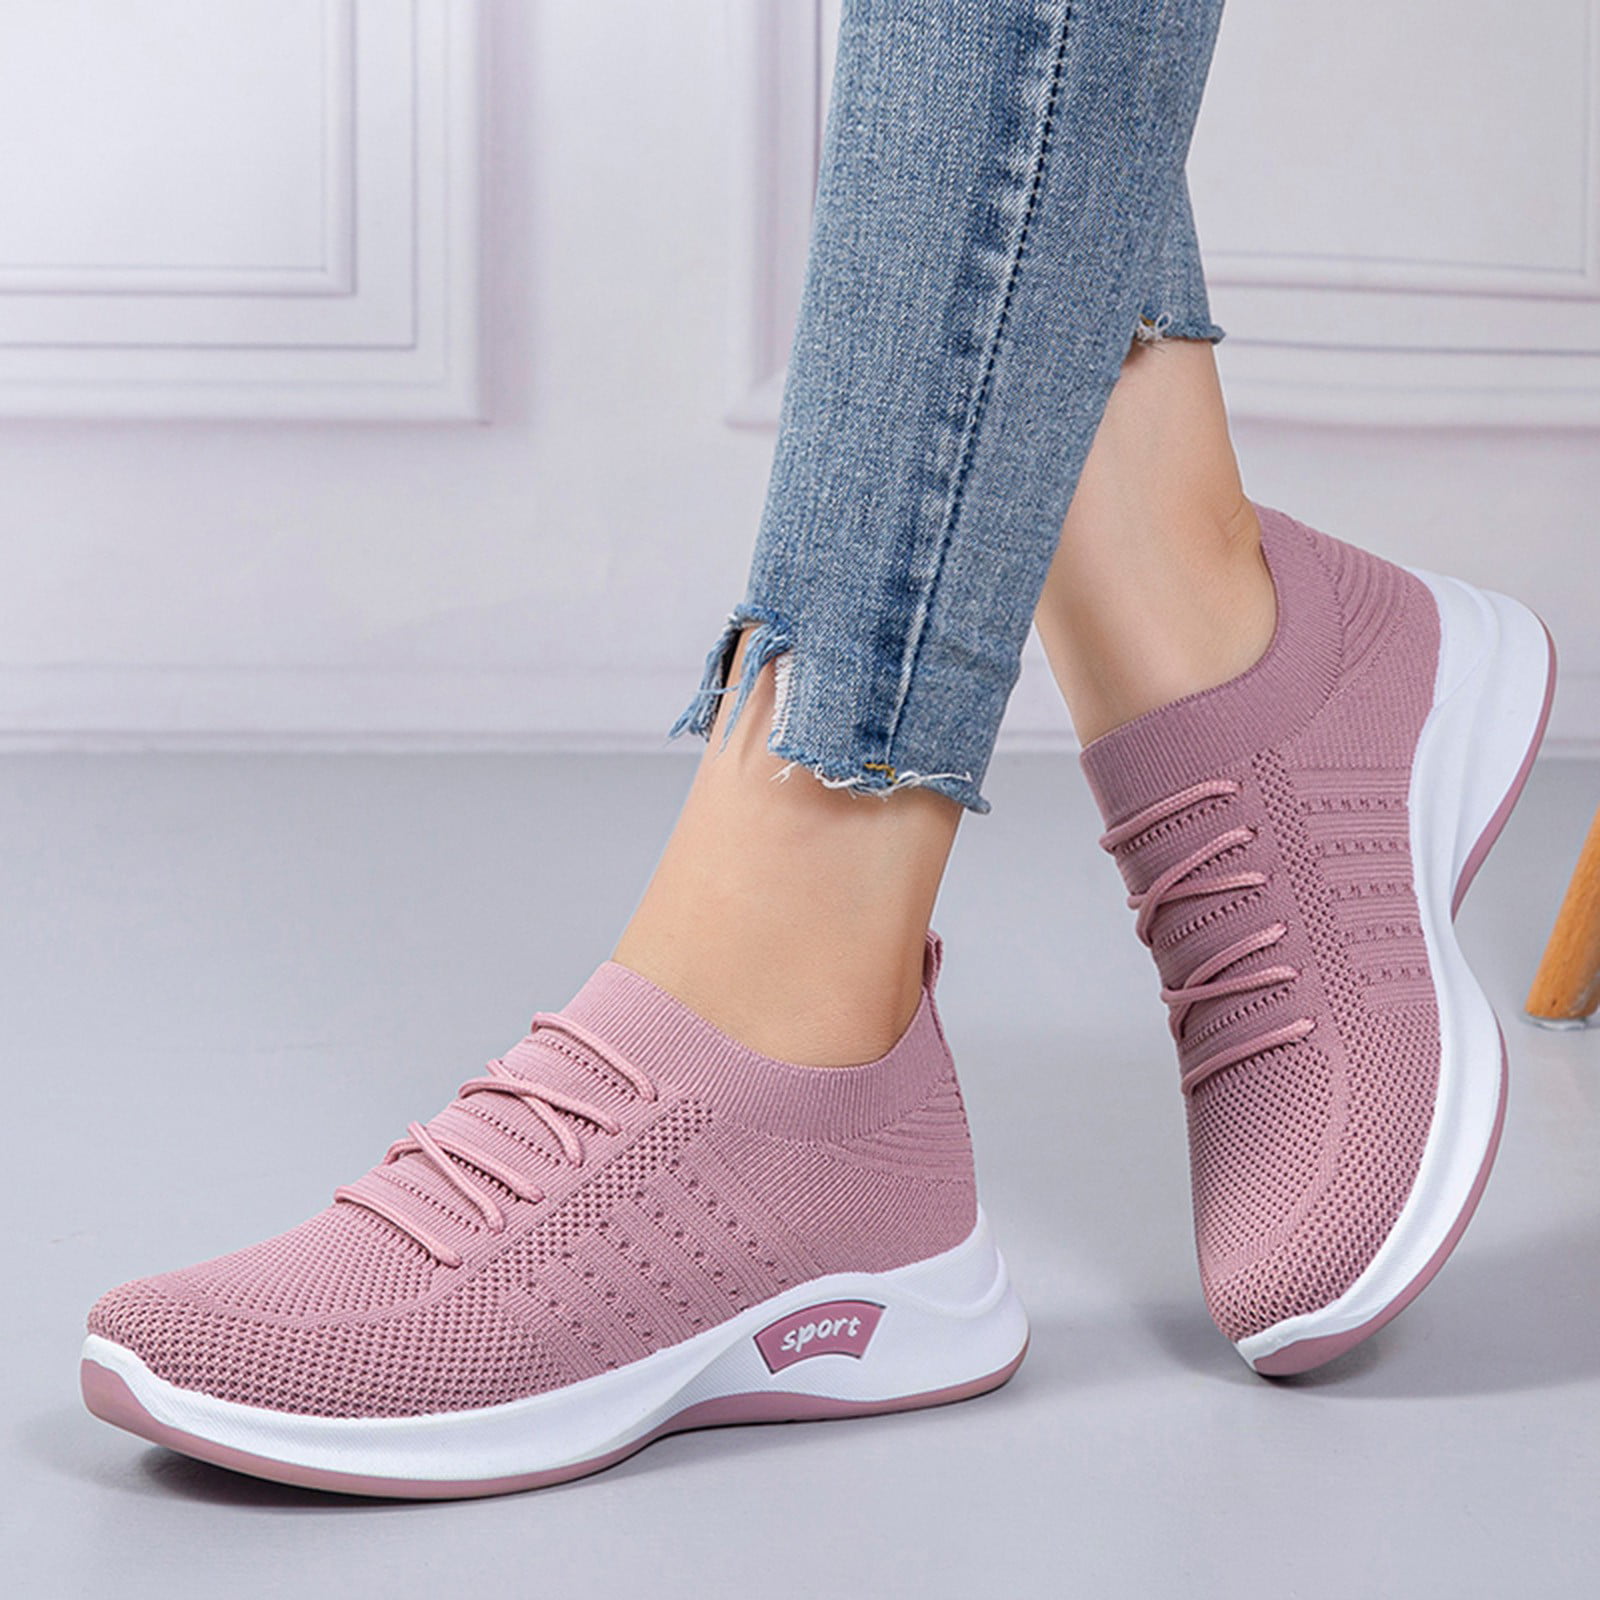 FZM Women shoes Ladies Shoes Fashion Casual Shoes Comfortable Lace Up Mesh  Breathable Casual Sneakers 